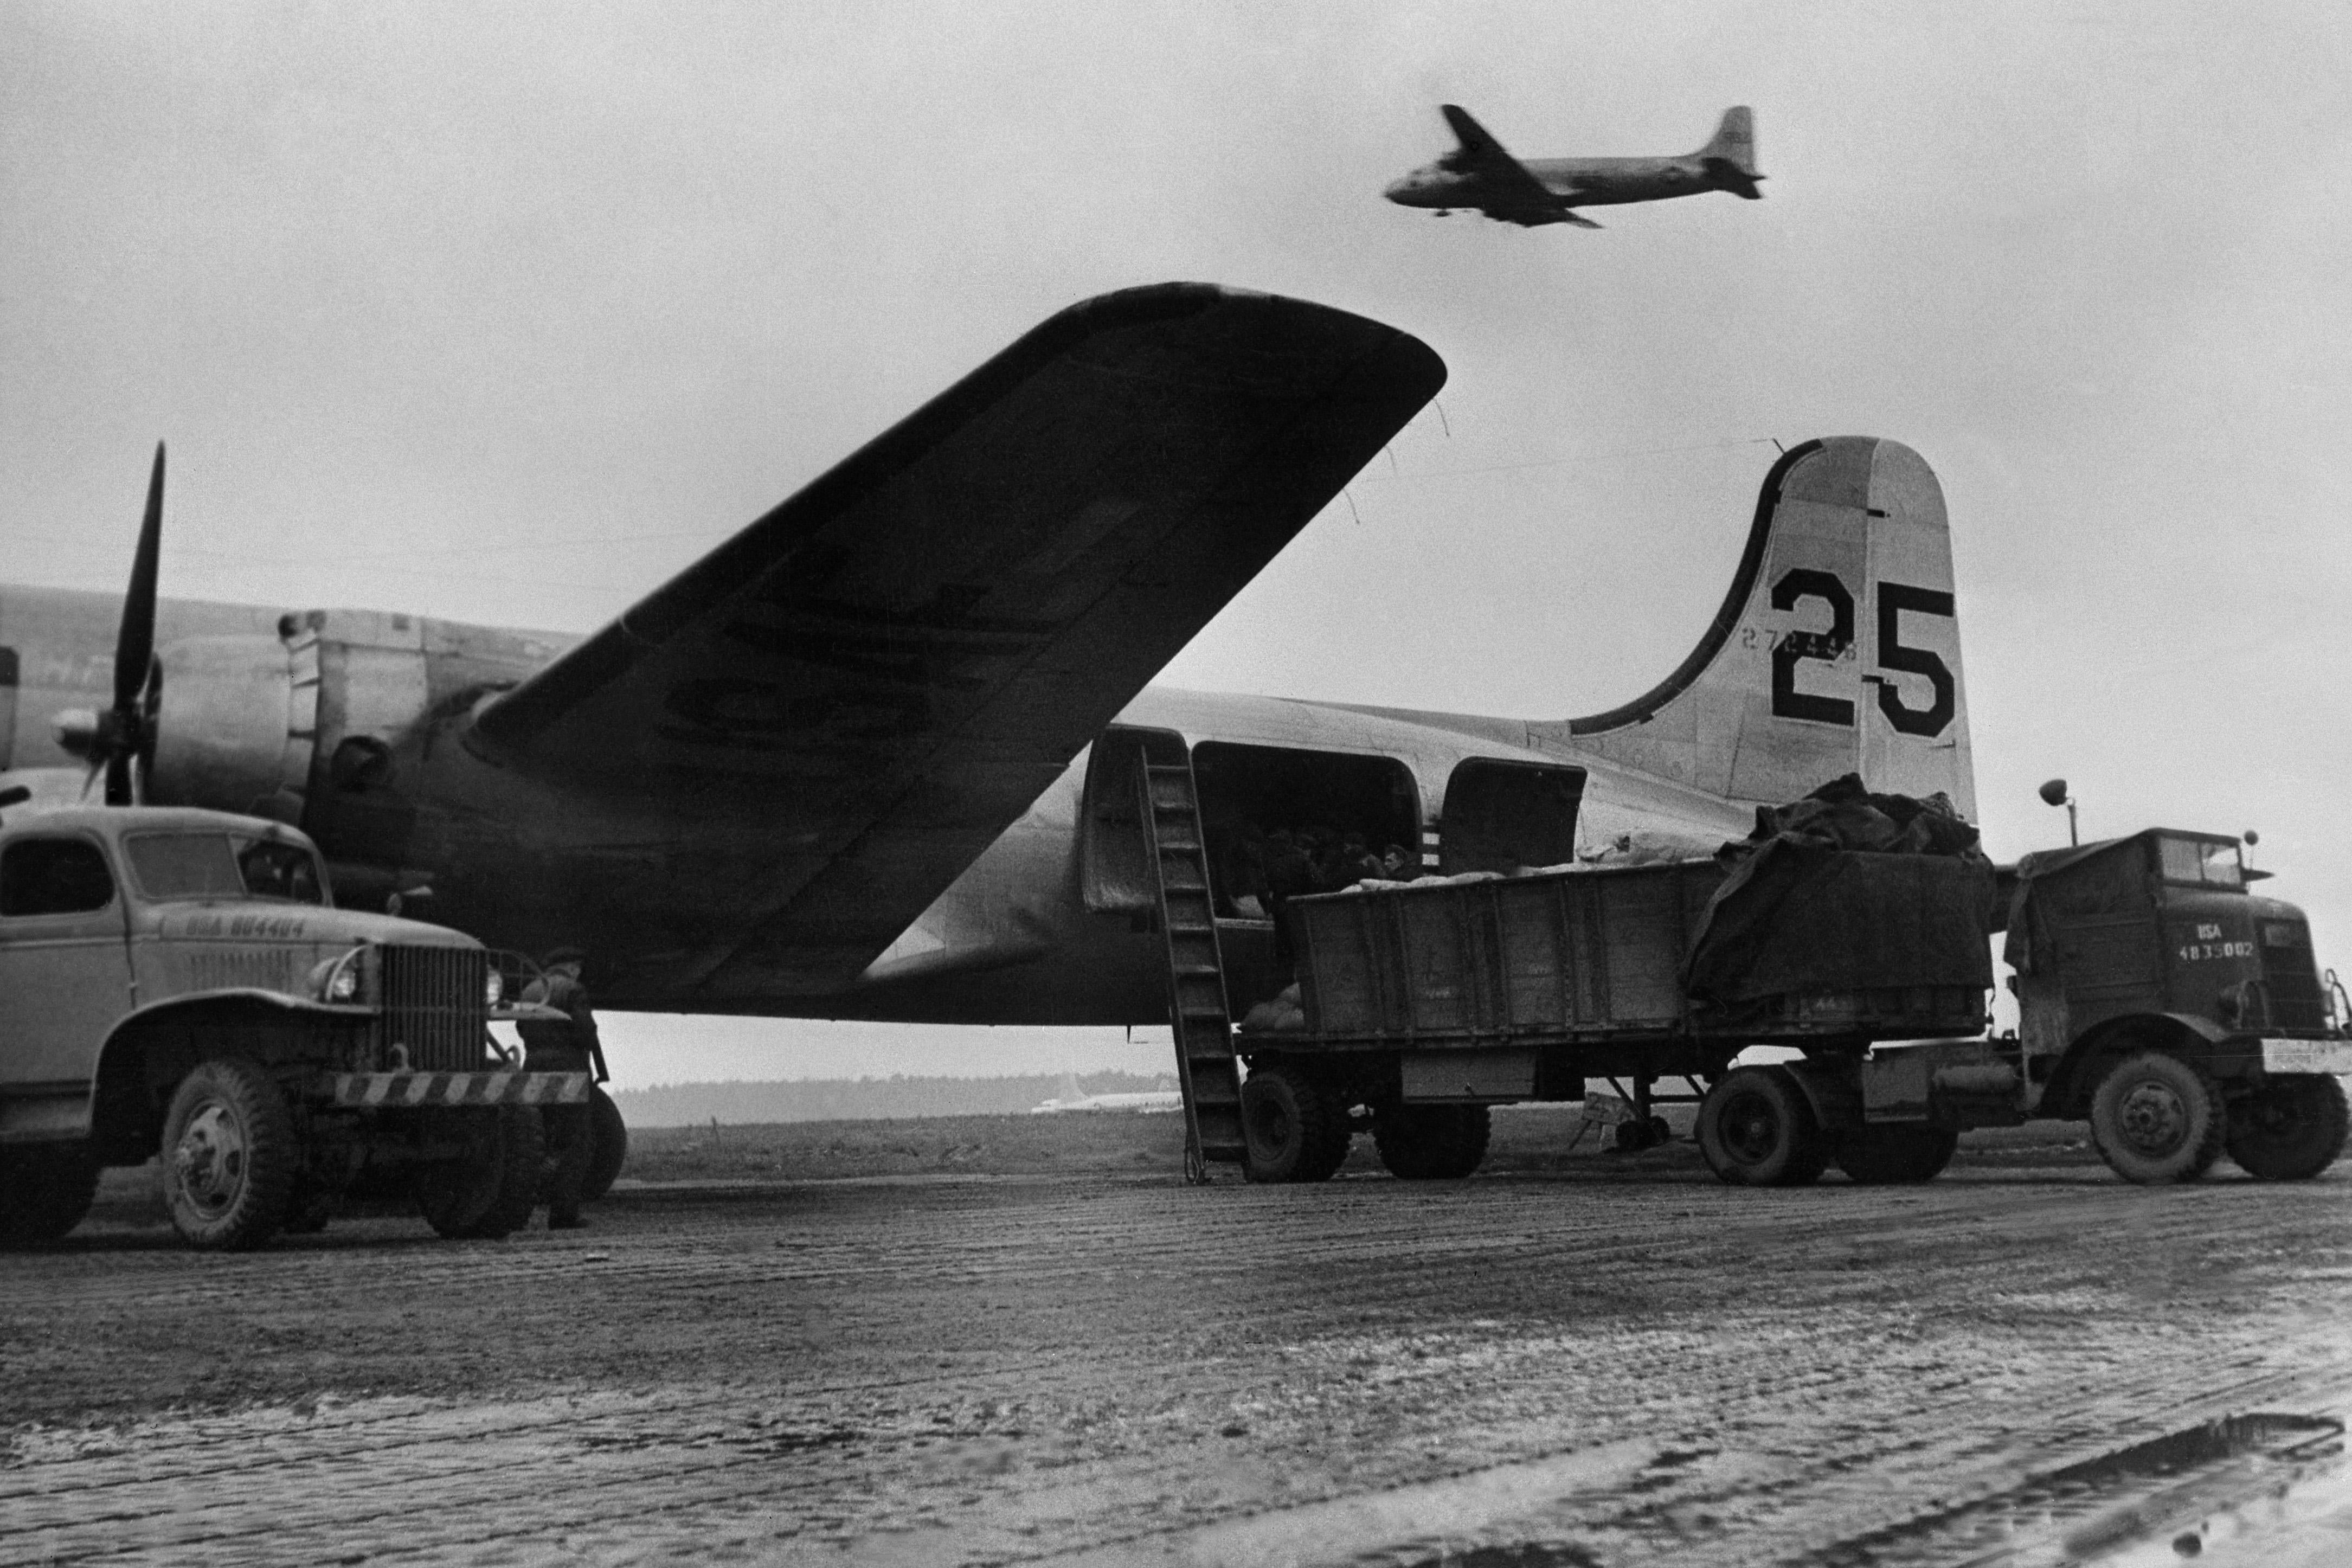 Trucks load planes on a tarmac as another plane flies by.